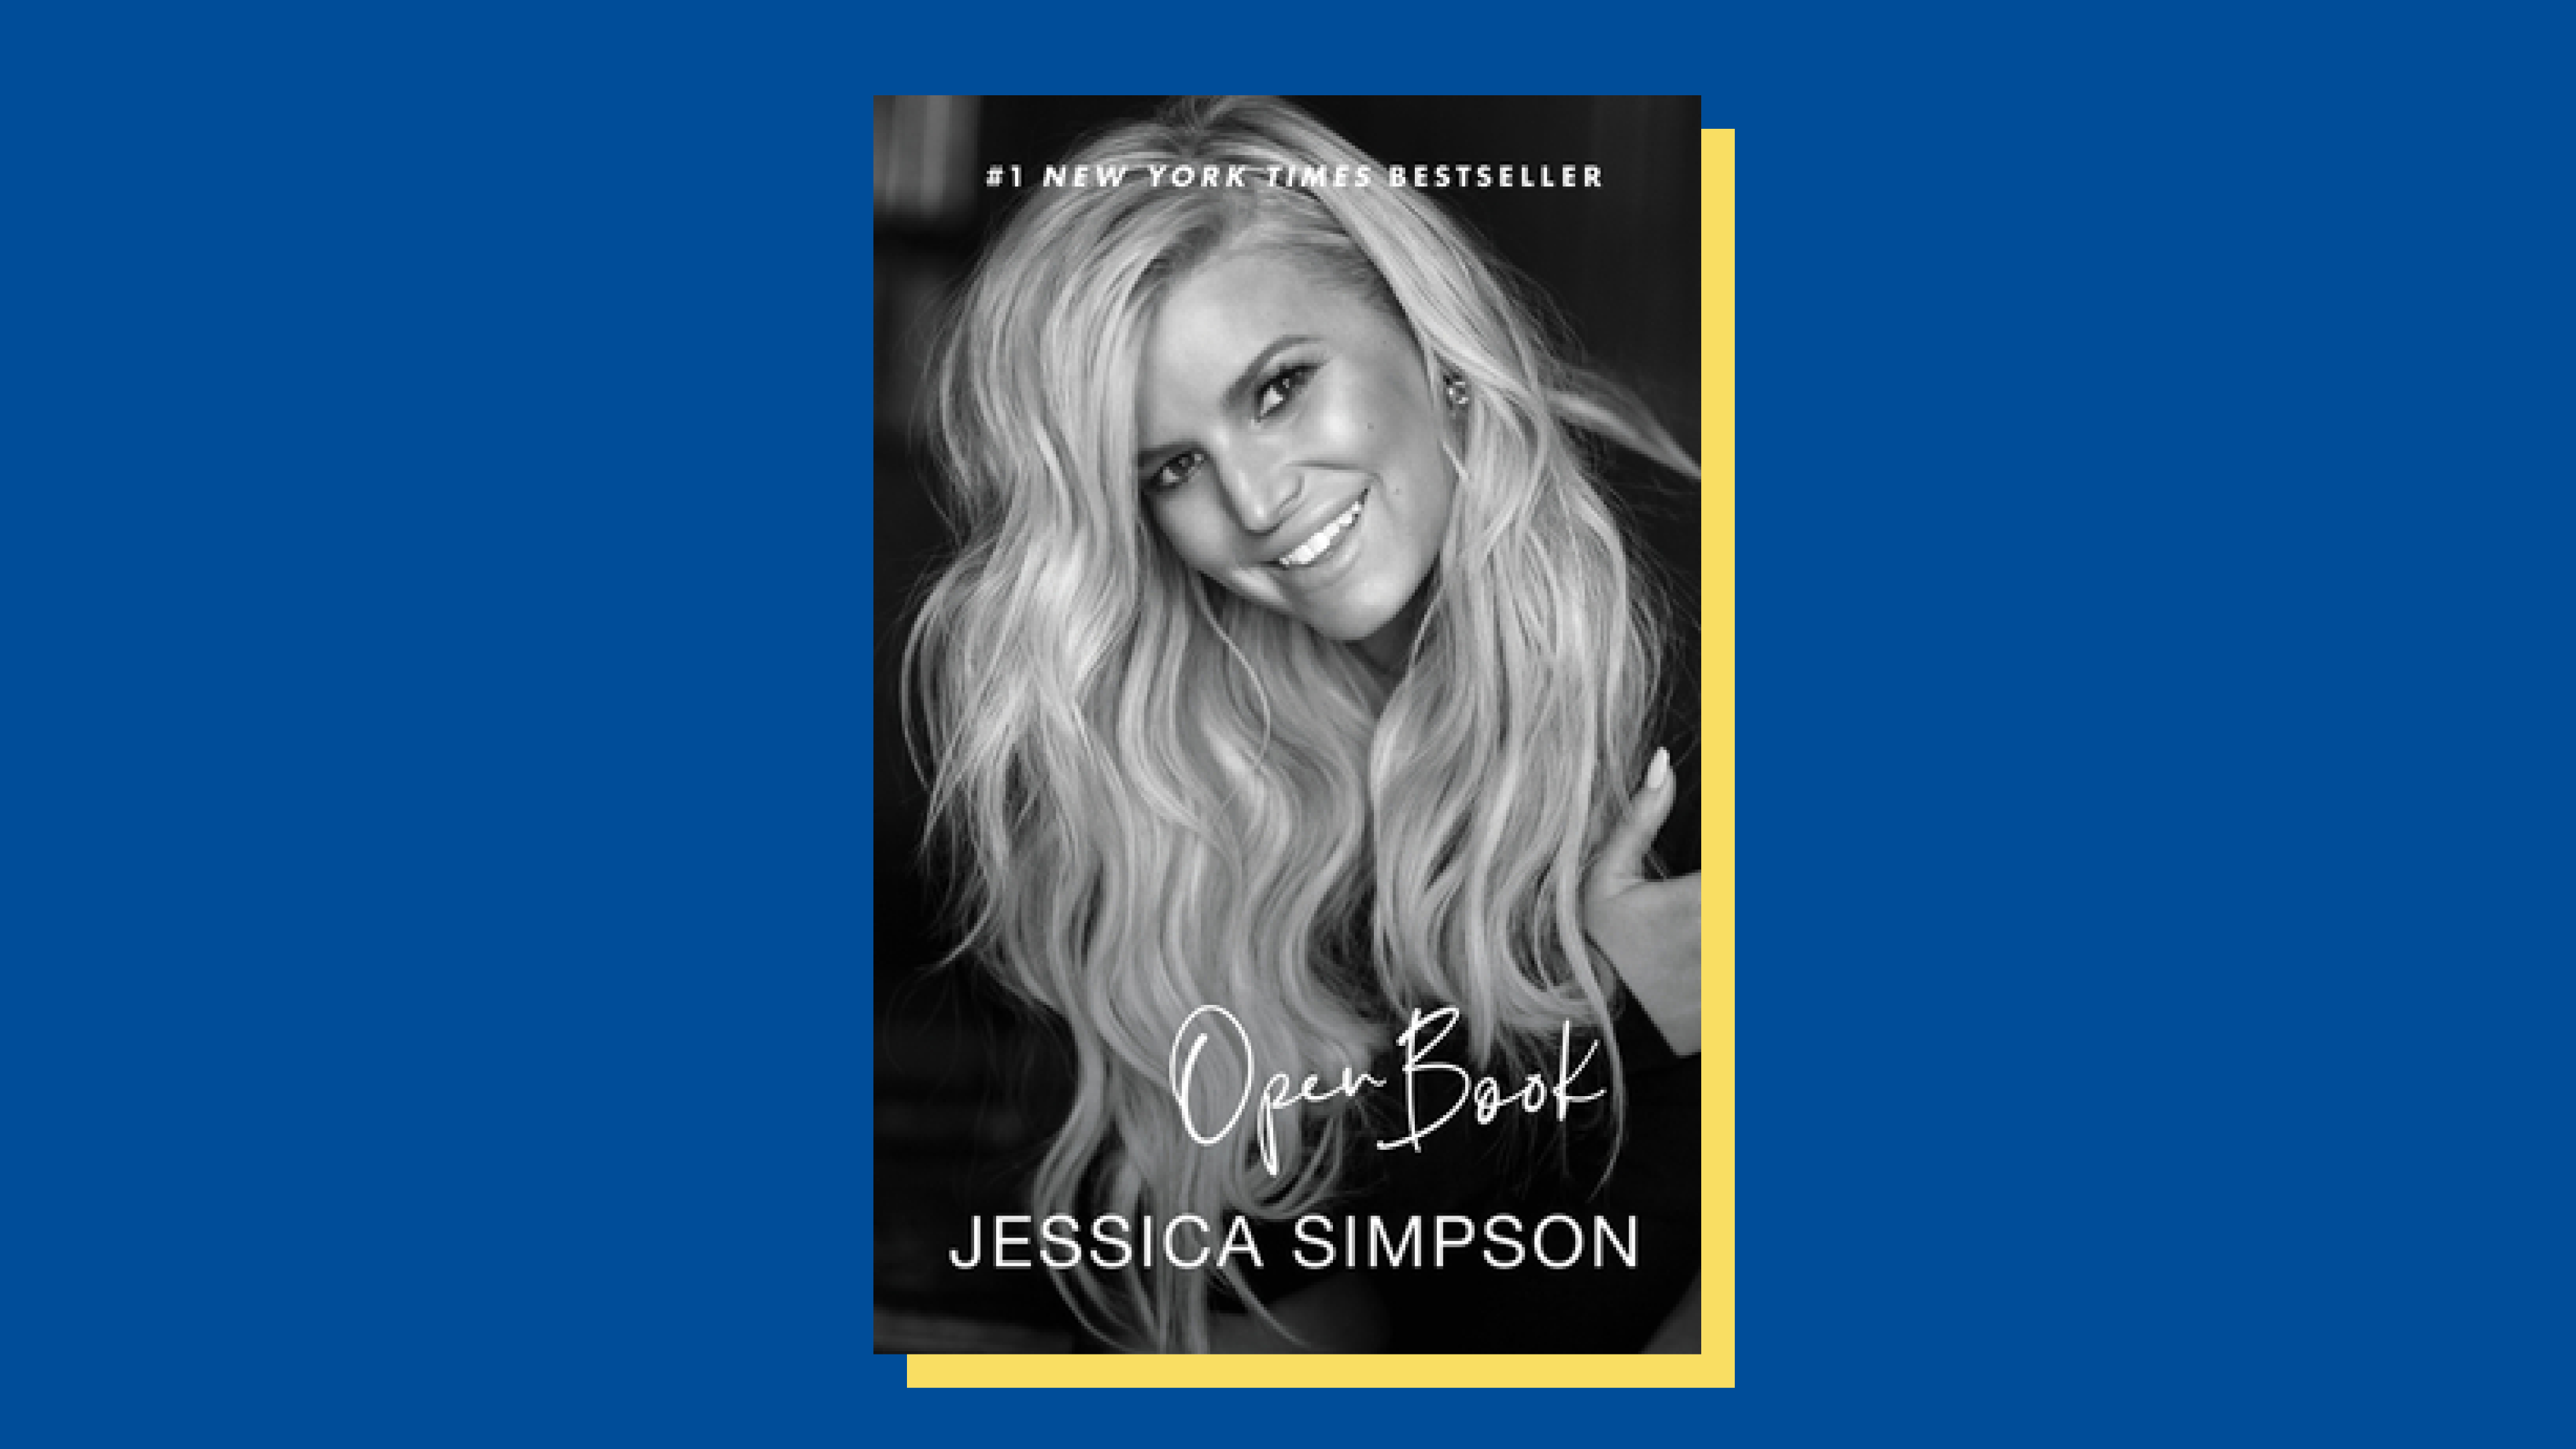 “Open Book” by Jessica Simpson 